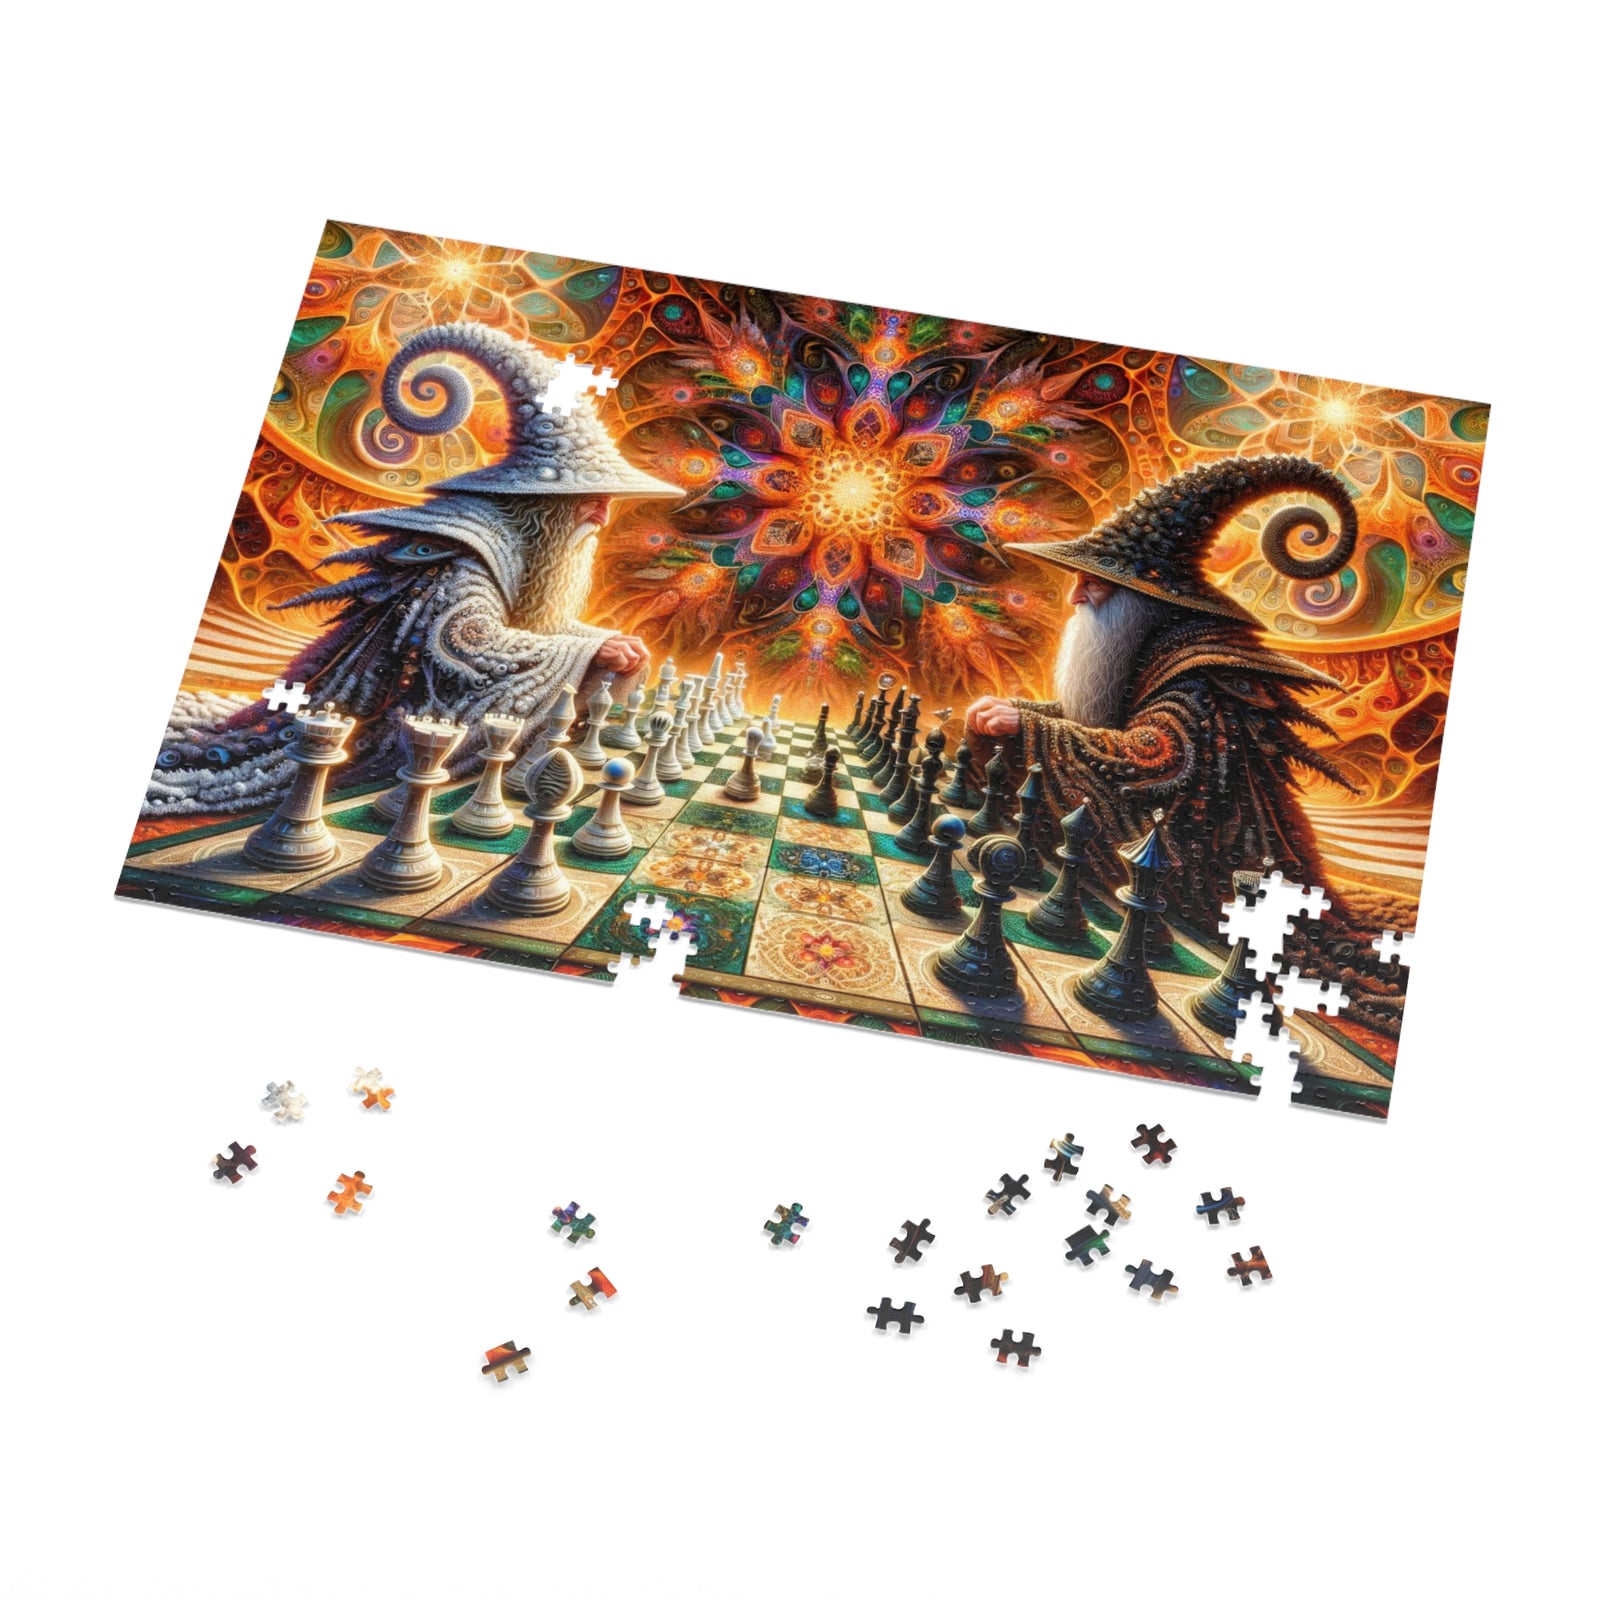 The Grandmasters of the Spiral Realms Jigsaw Puzzle